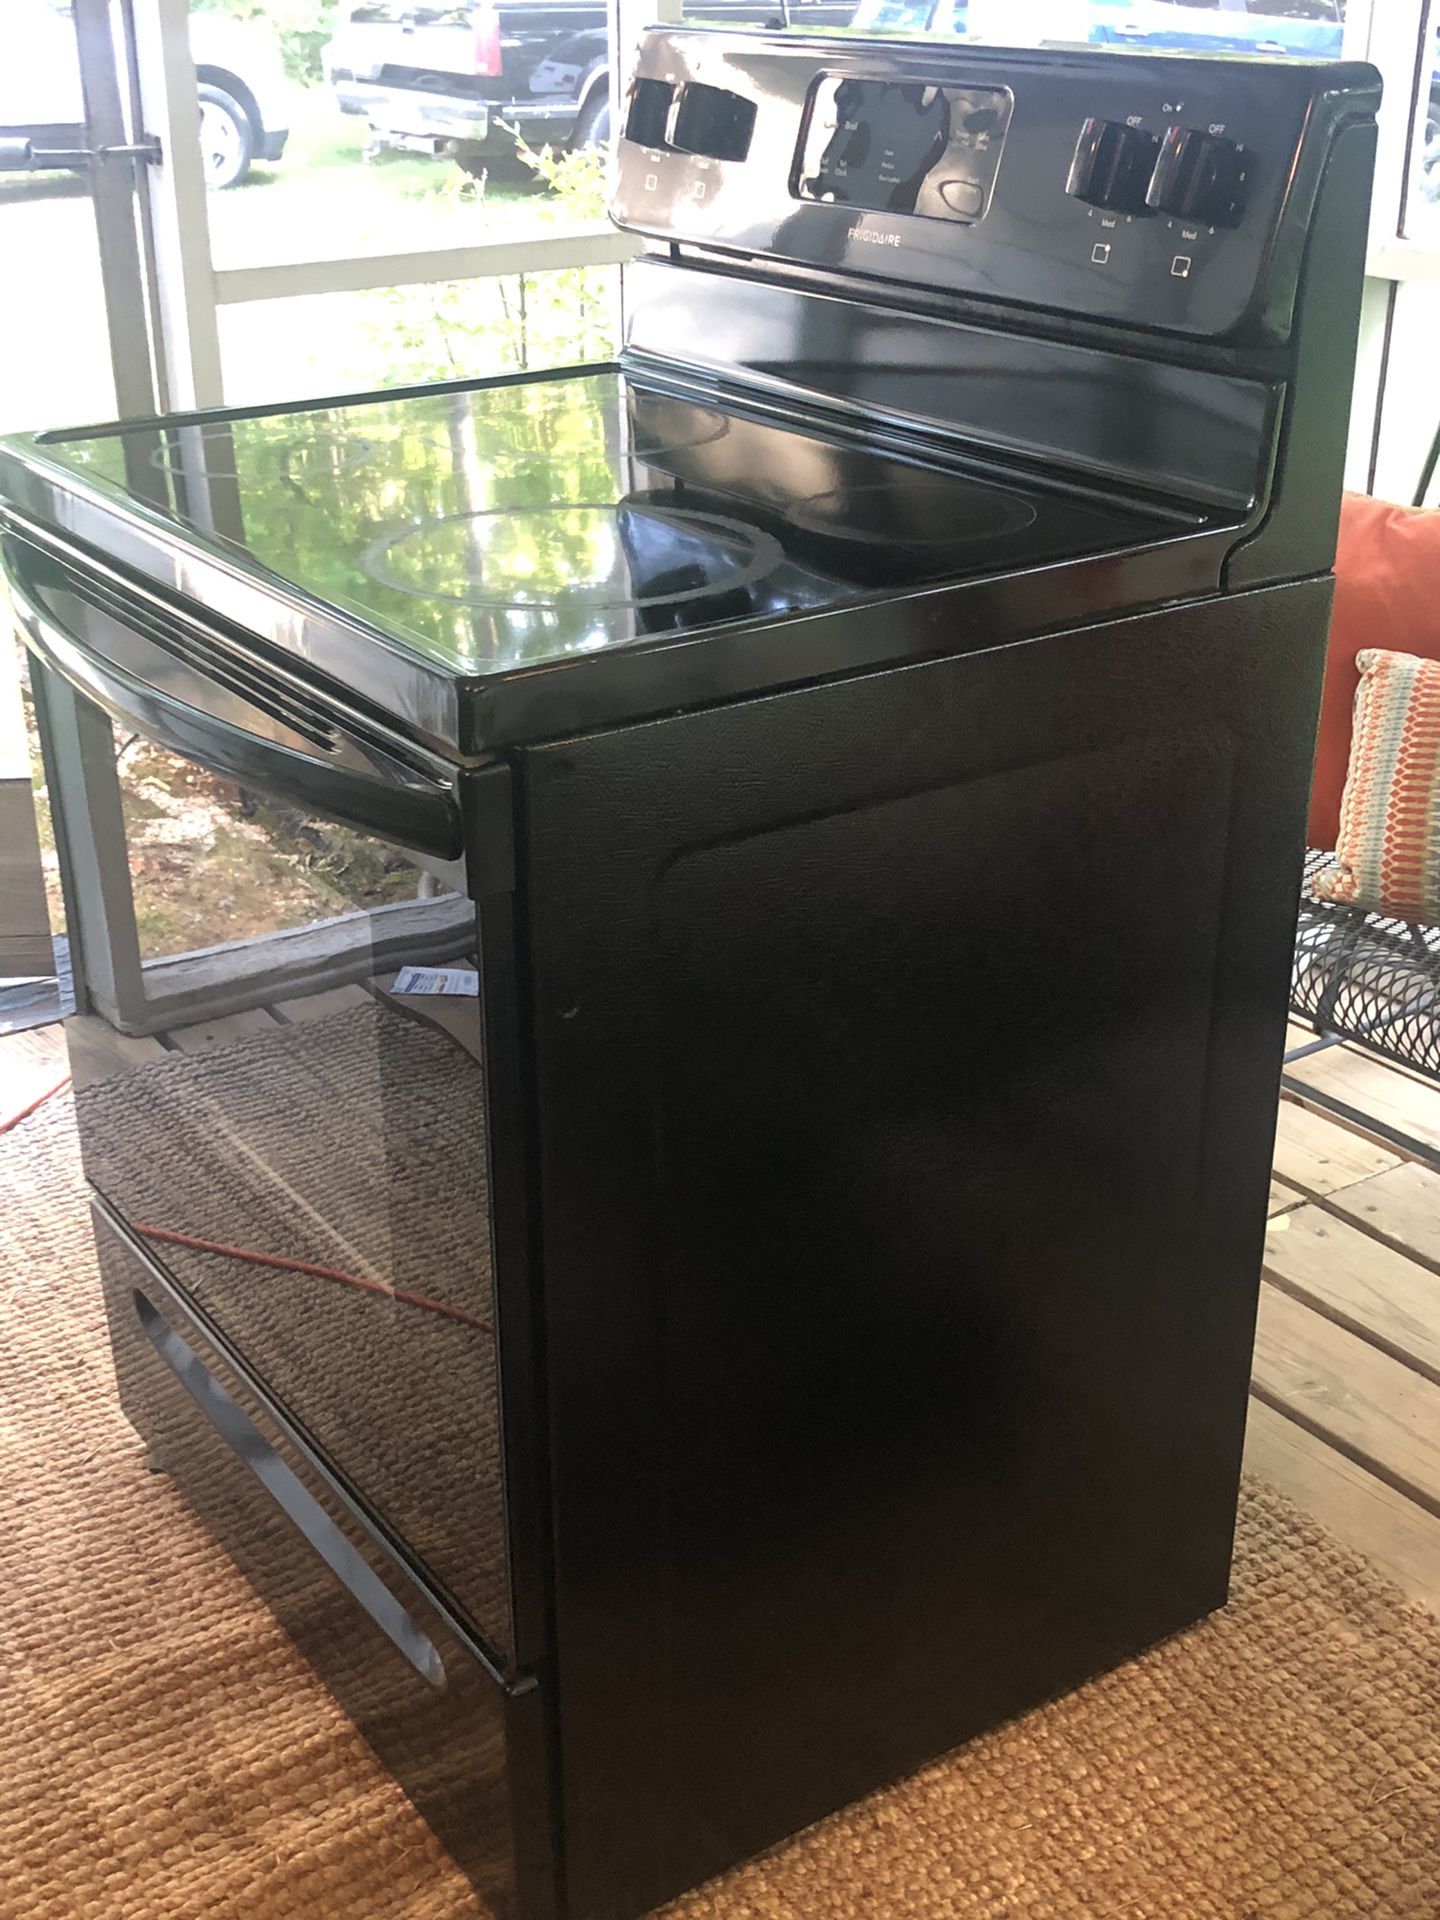 Frigidaire glass top electric stove. Oven works, but stove top doesn’t. Black $35